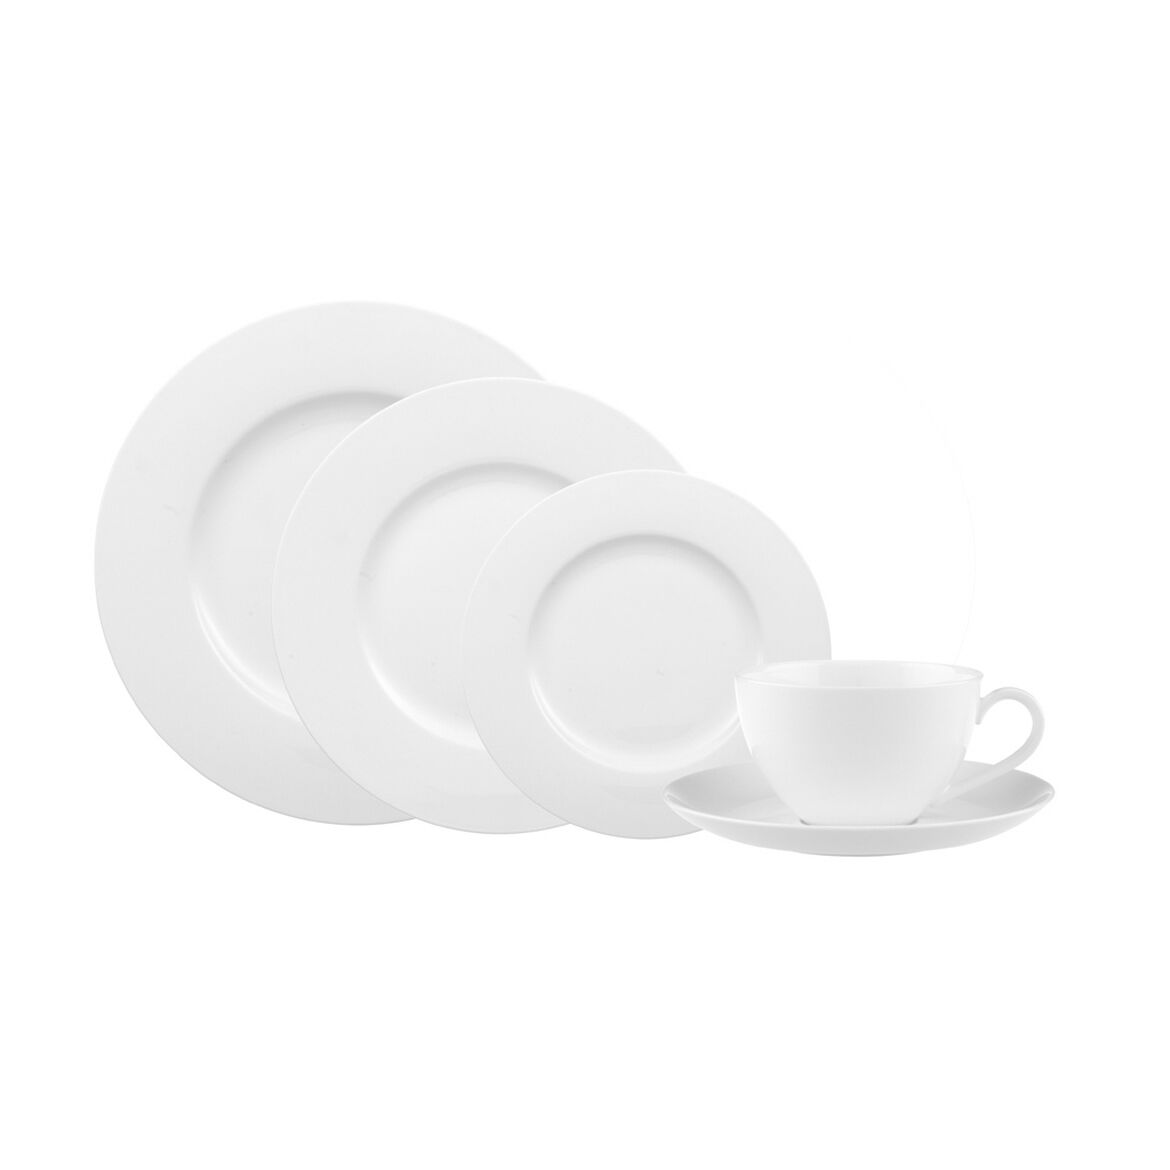 Villeroy & Boch Anmut 5-Piece Place Setting